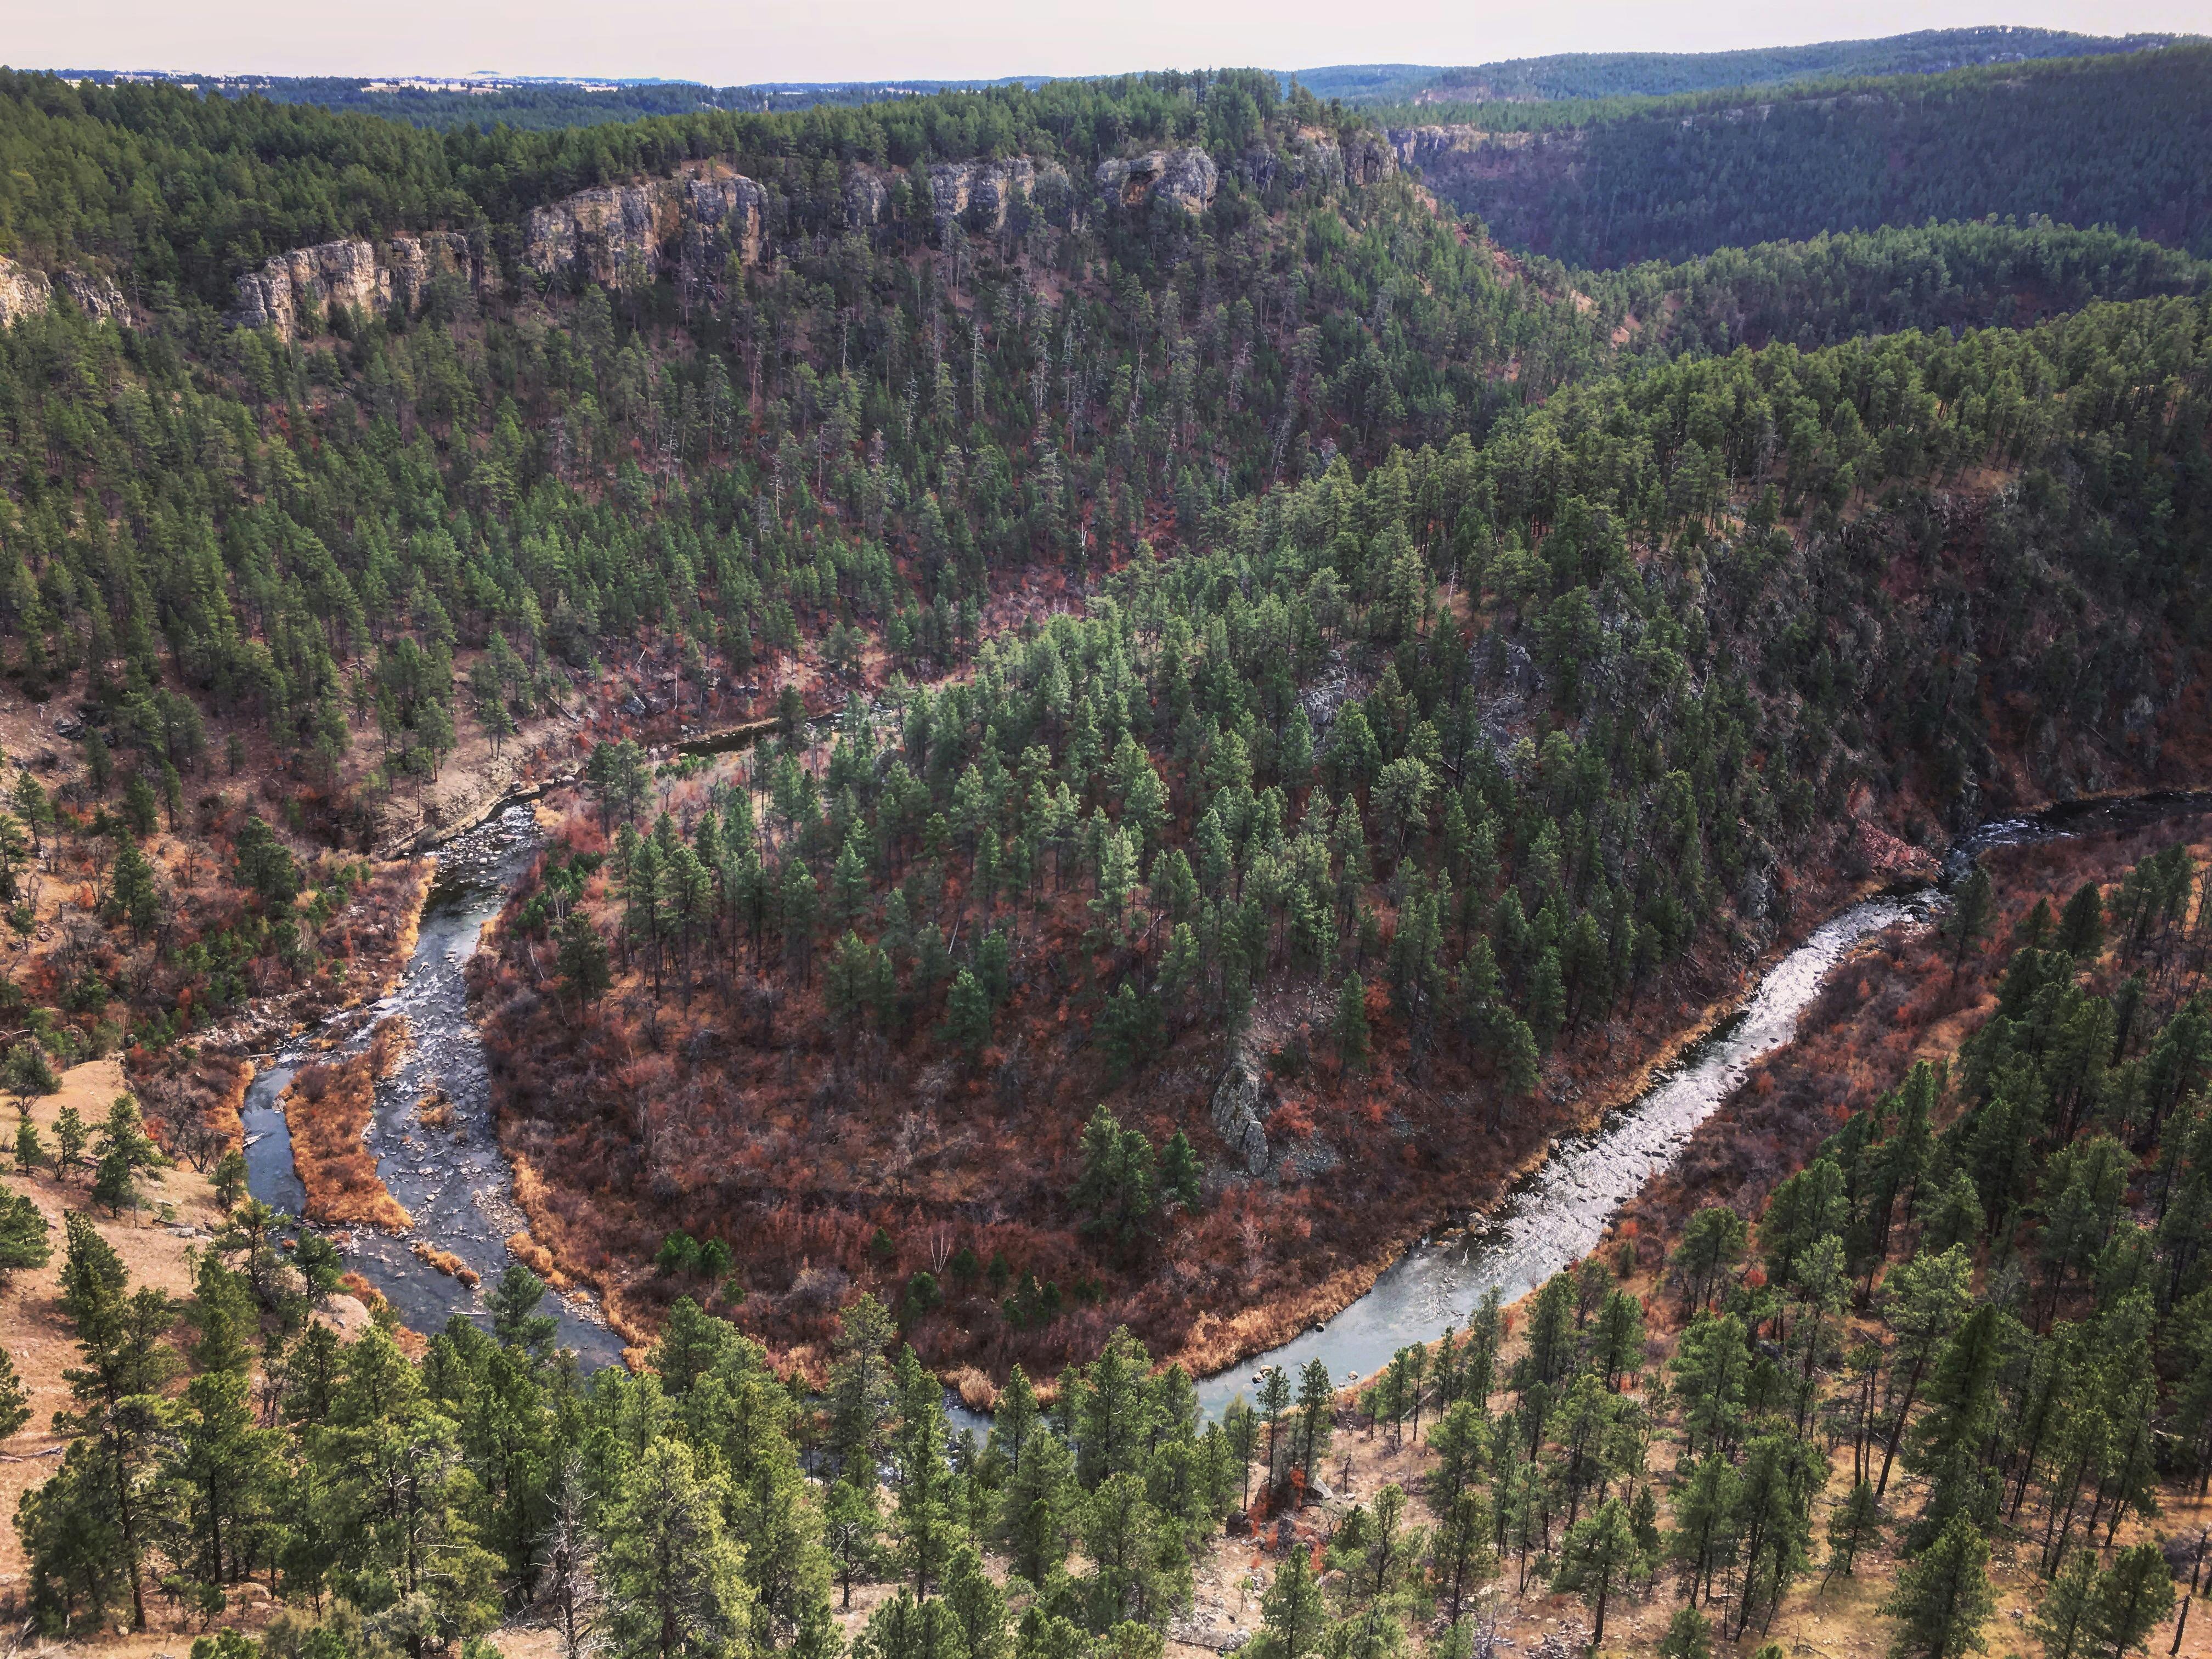 An aerial view of Falling Rock Overlook at Black Hills National Forest.